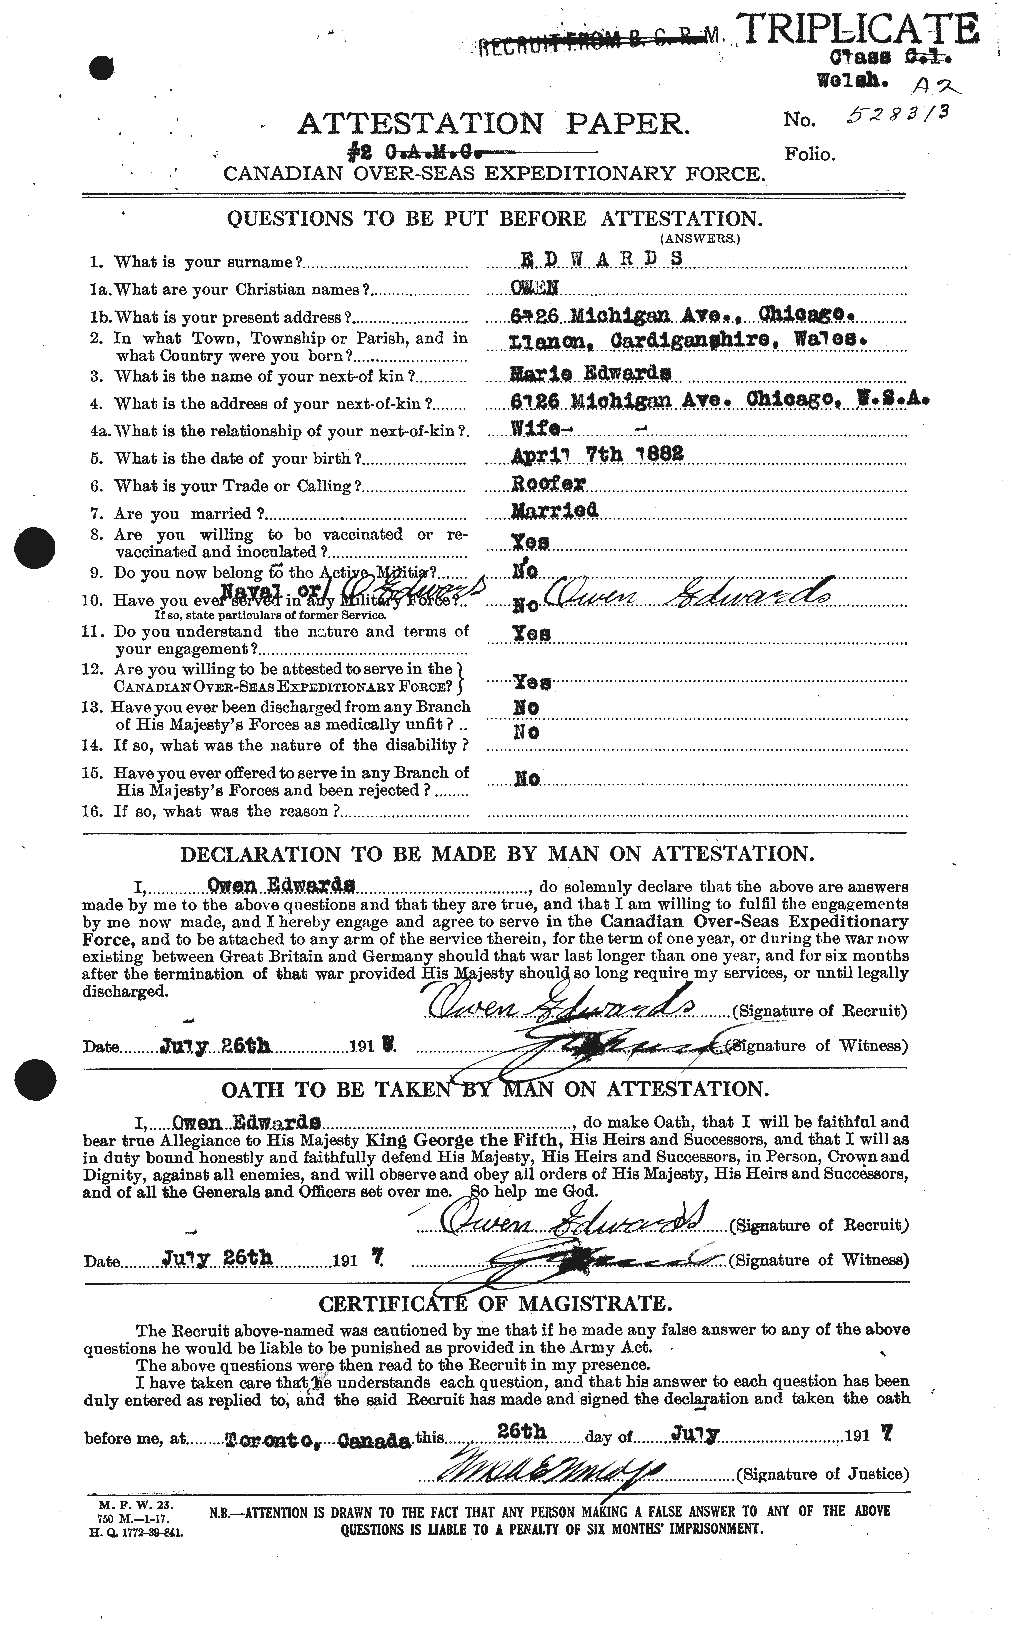 Personnel Records of the First World War - CEF 310228a